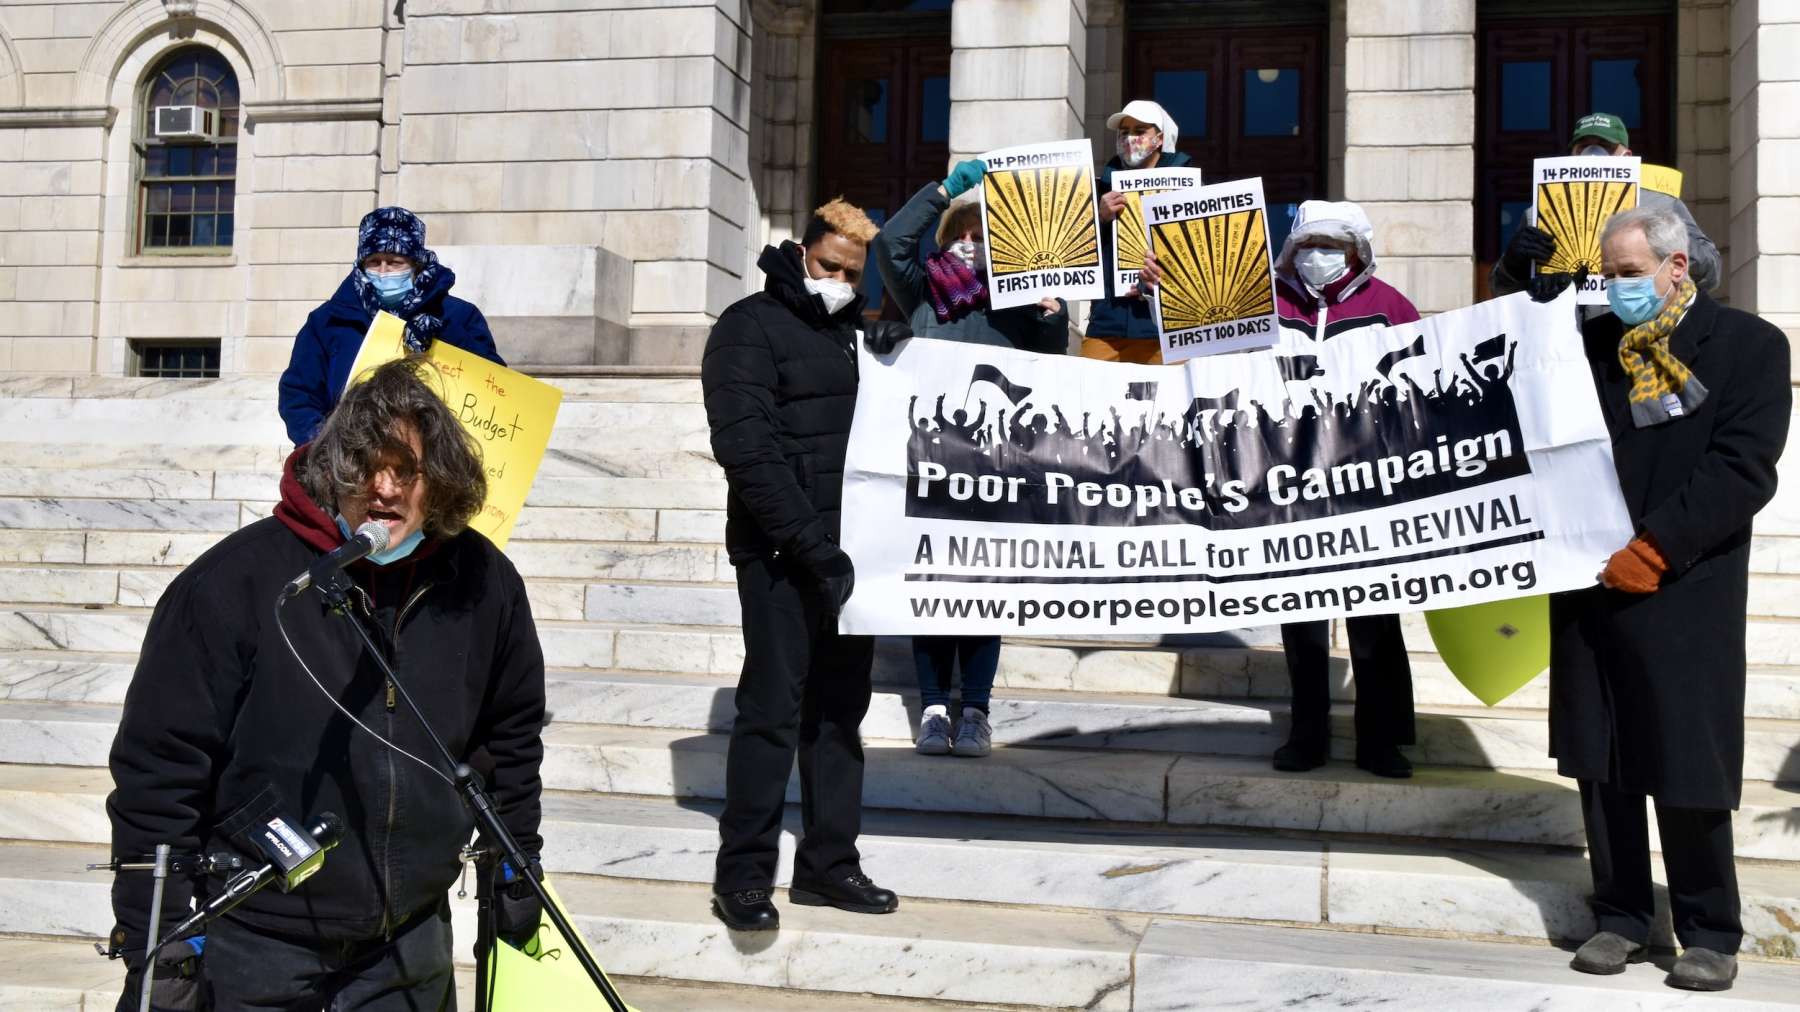 Rhode Island News: The RI Poor People’s Campaign ‘nails’ their moral agenda to the State House doors